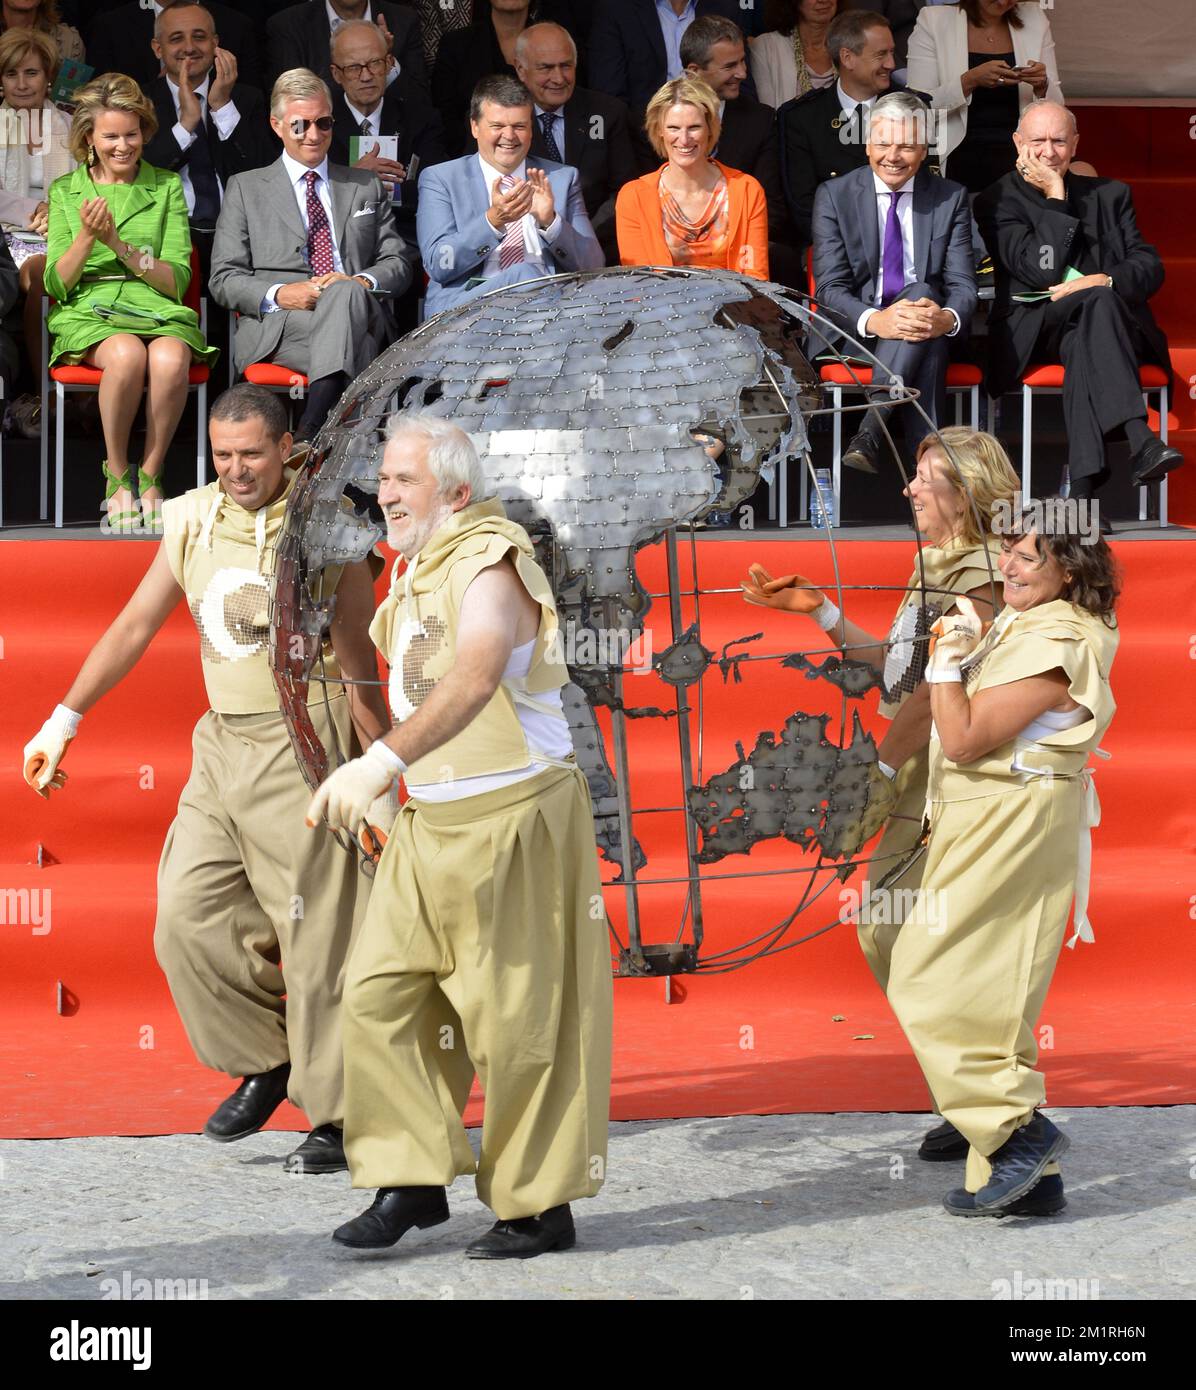 Queen Mathilde of Belgium, King Philippe - Filip of Belgium, Mechelen mayor Bart Somers and his wife Miet Bourlon, Vice-Prime Minister and Foreign Minister Didier Reynders and Archbishop Andre-Joseph Leonard watch the 'Hanswijkcavalcade' and 'Ommegang' historical parades in Mechelen, Sunday 01 September 2013. The 'Hanswijkcavalcade' parade is organized once every 25 years. BELGA PHOTO BENOIT DOPPAGNE Stock Photo